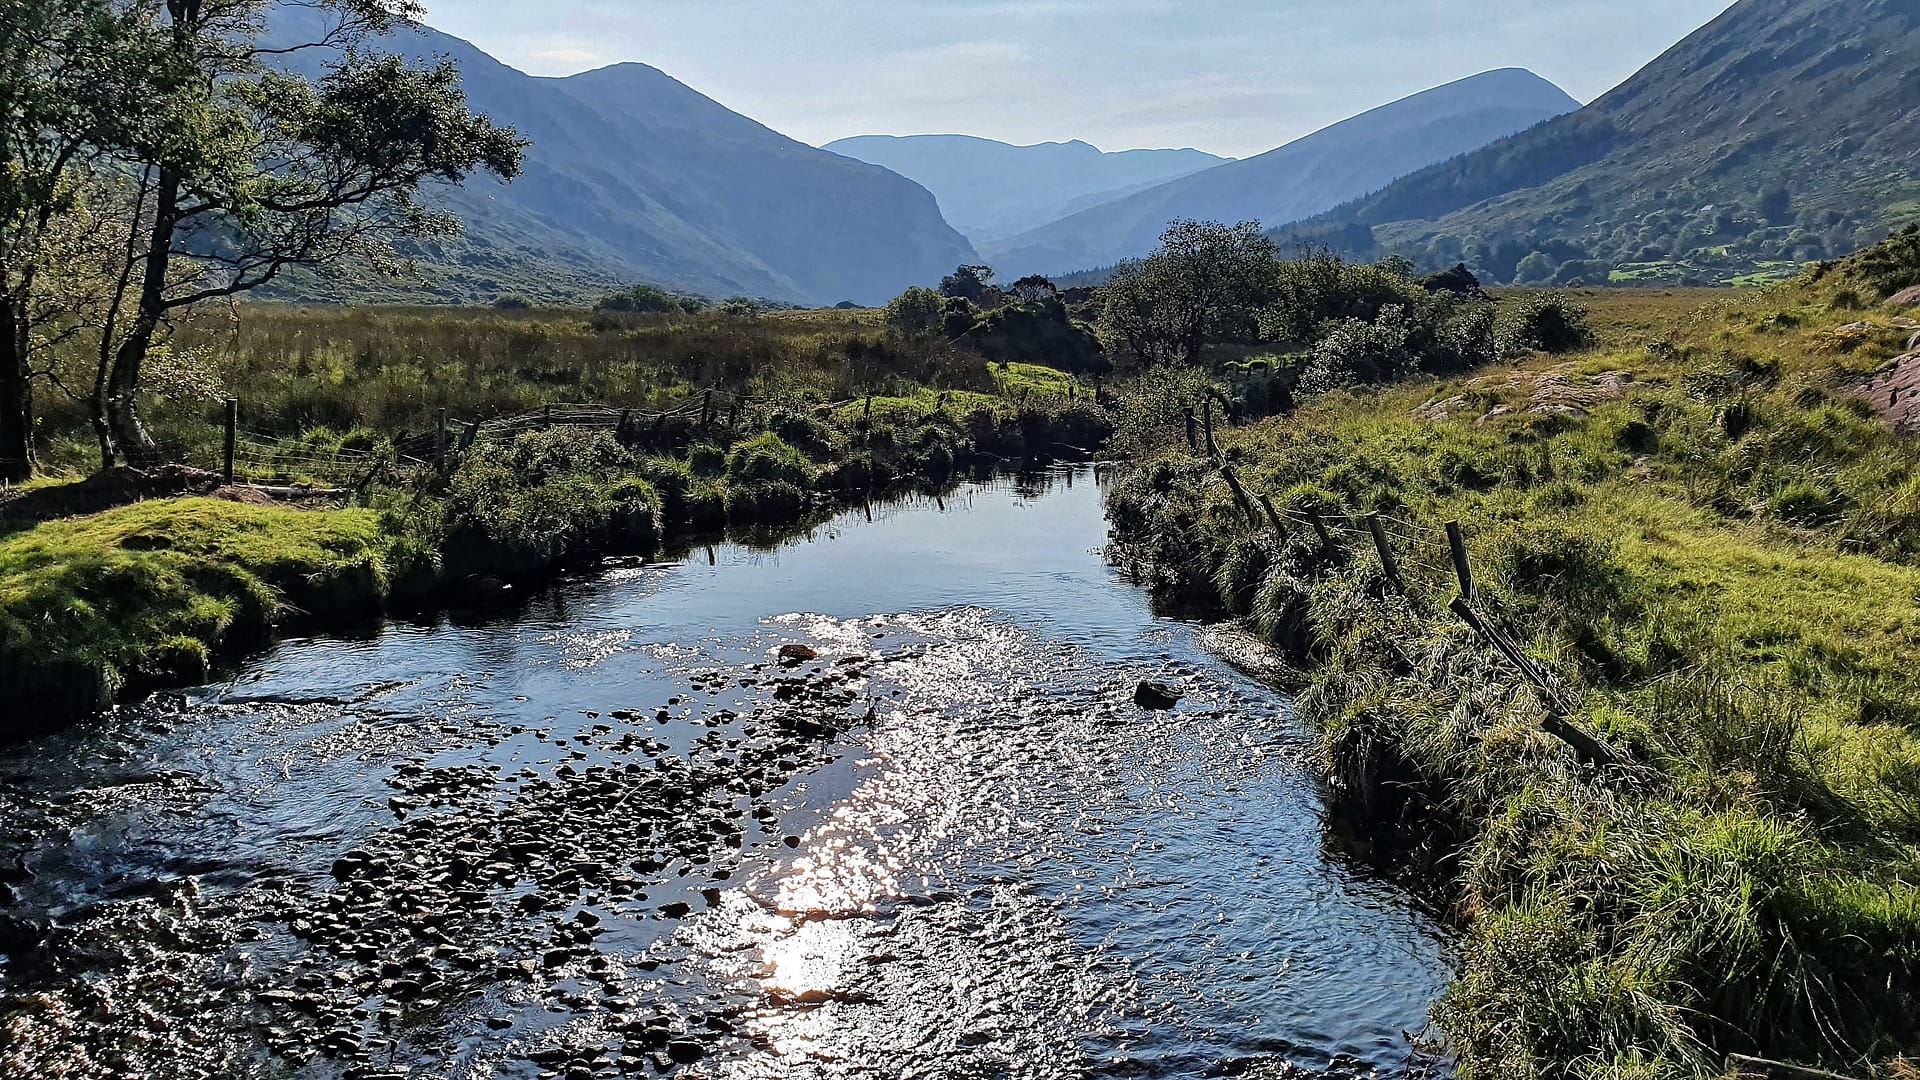 The Gearhameen River in the Black Valley, County Kerry, Ireland